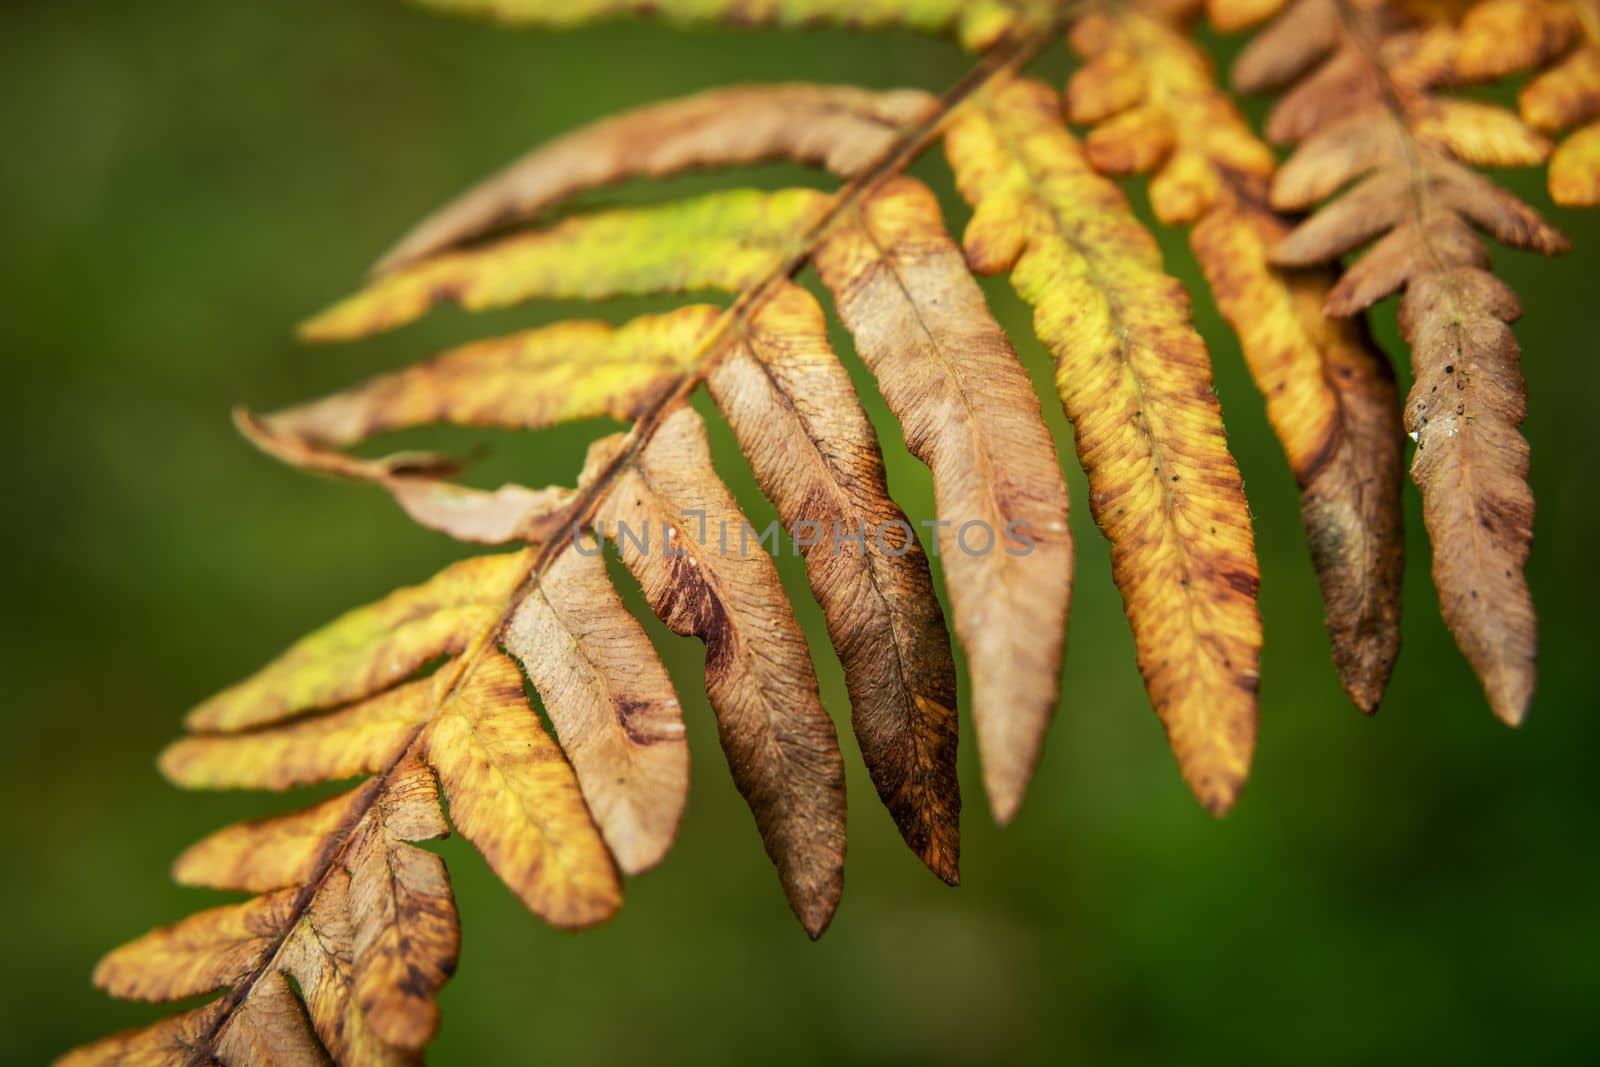 The withering leaves of the forest fern, October background